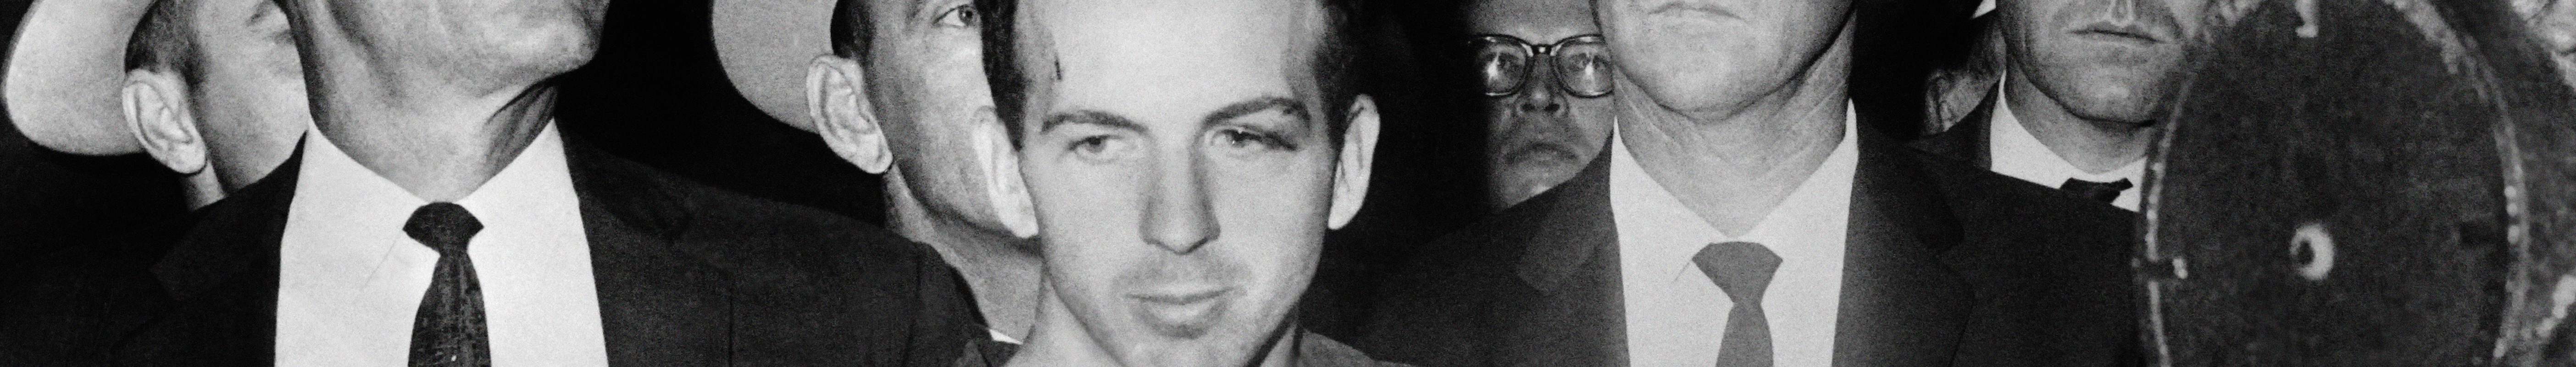 President John F. Kennedy's murderer Lee Harvey Oswald during a press conference after his arrest in Dallas.